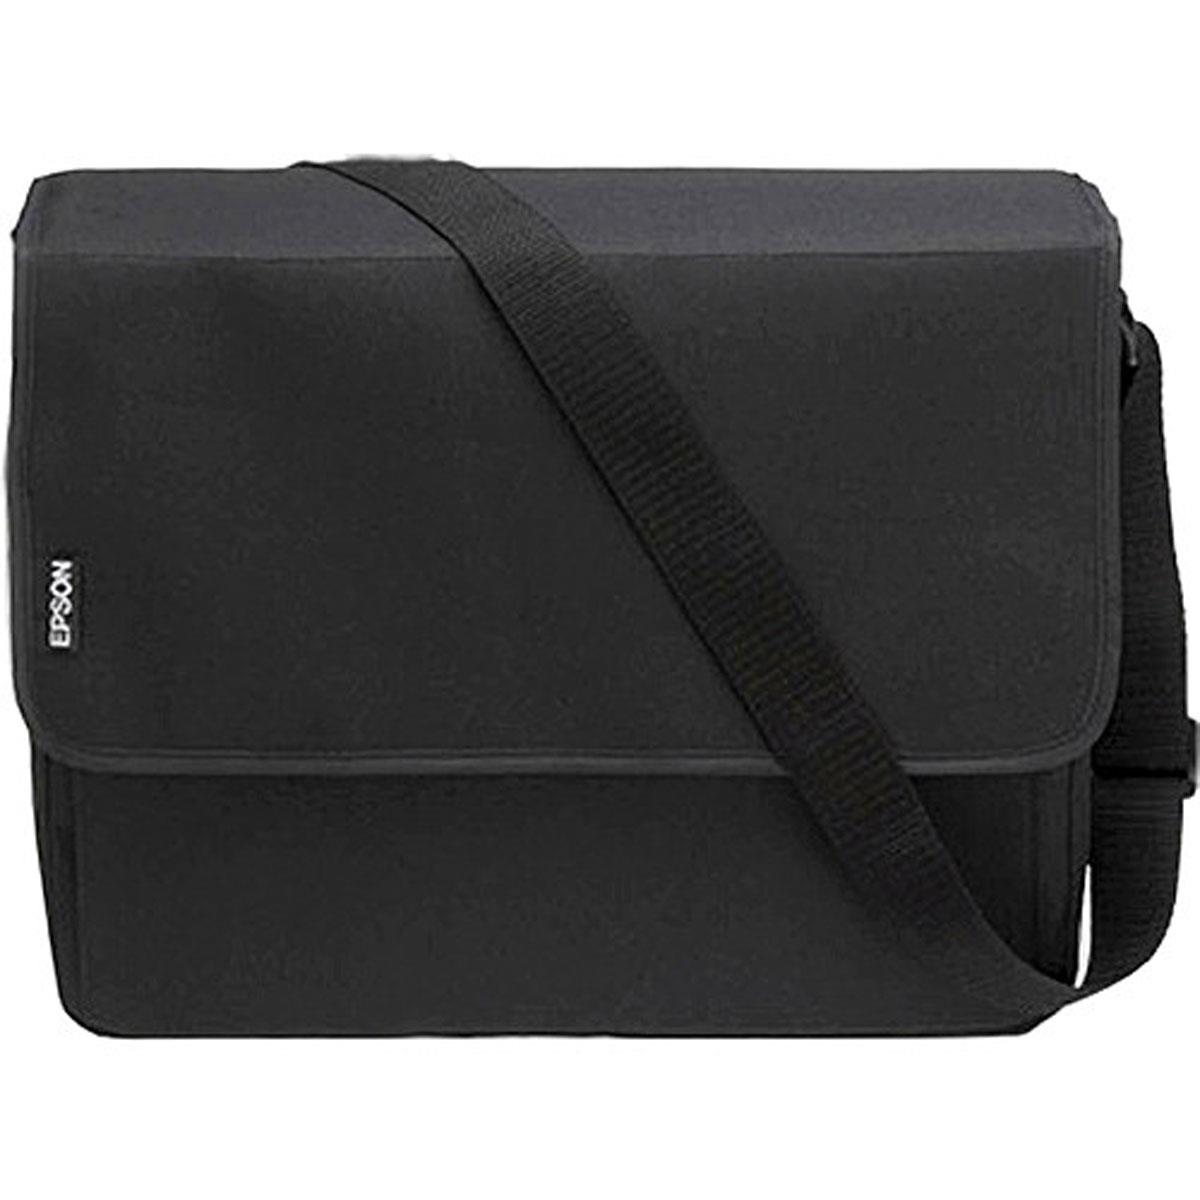 Epson Soft carrying case for PowerLite 92/93/95/96/905/915/1835W Projectors -  V12H001K64